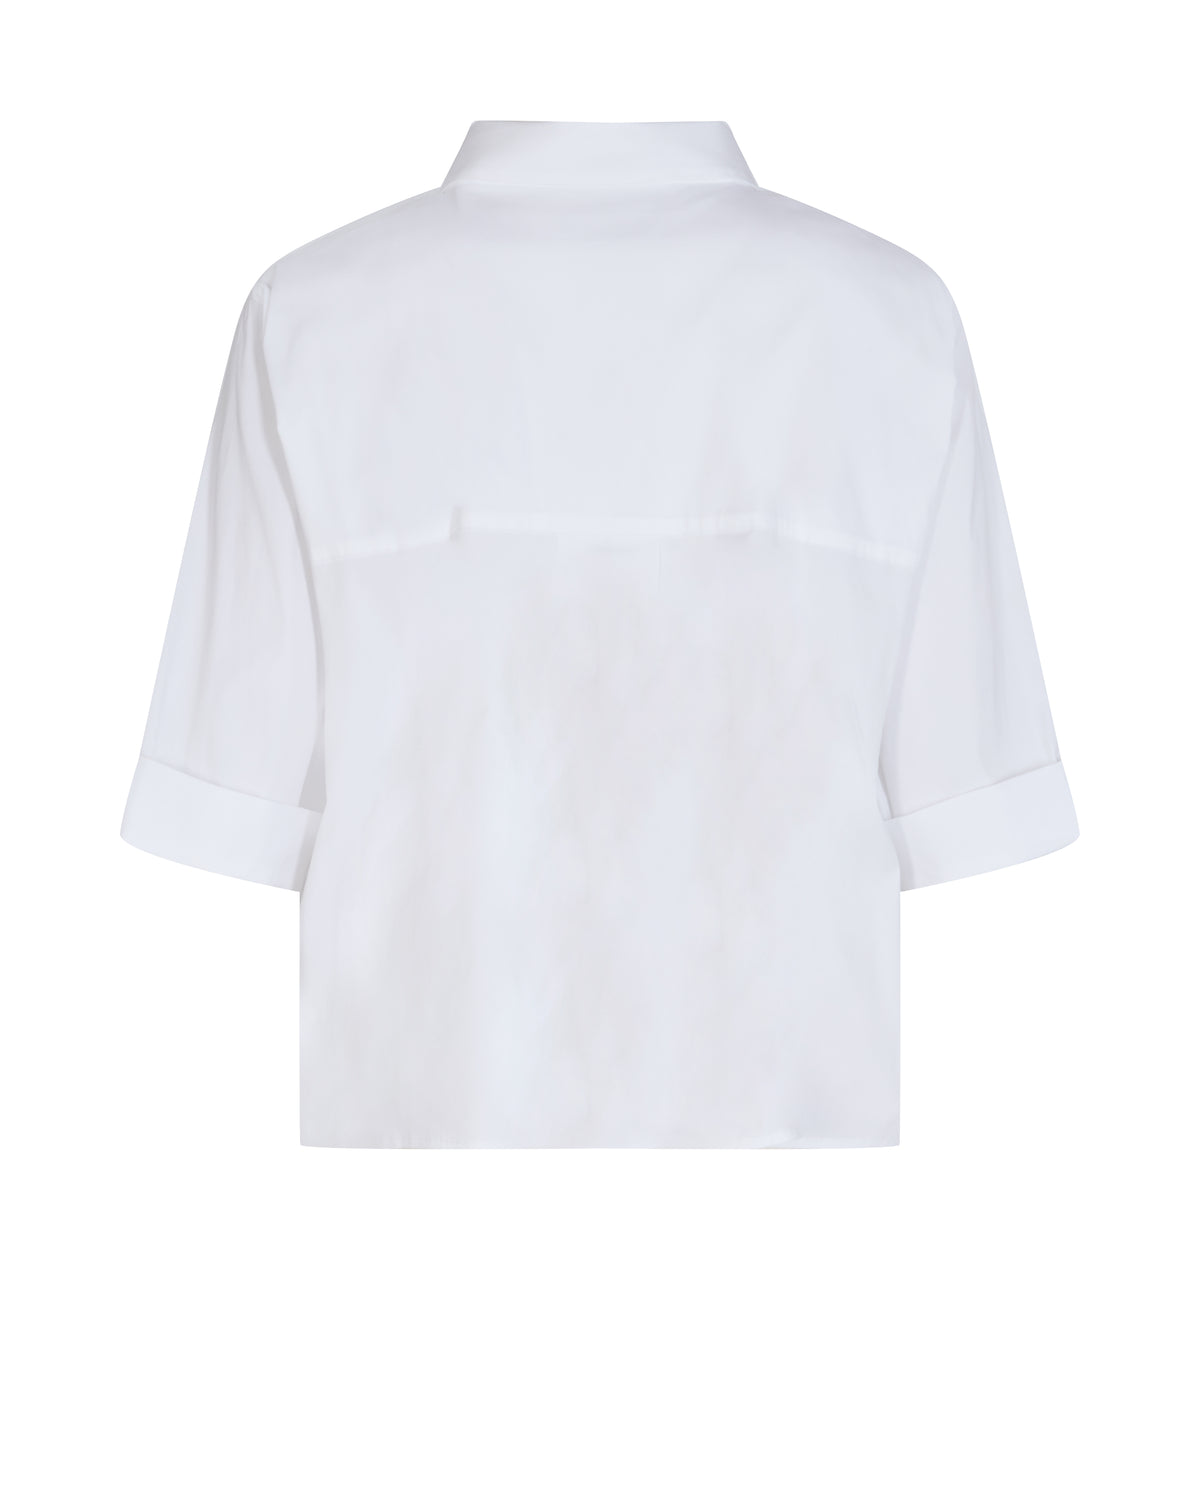 Classic collared boxy fit white shirt with elbow length sleeves